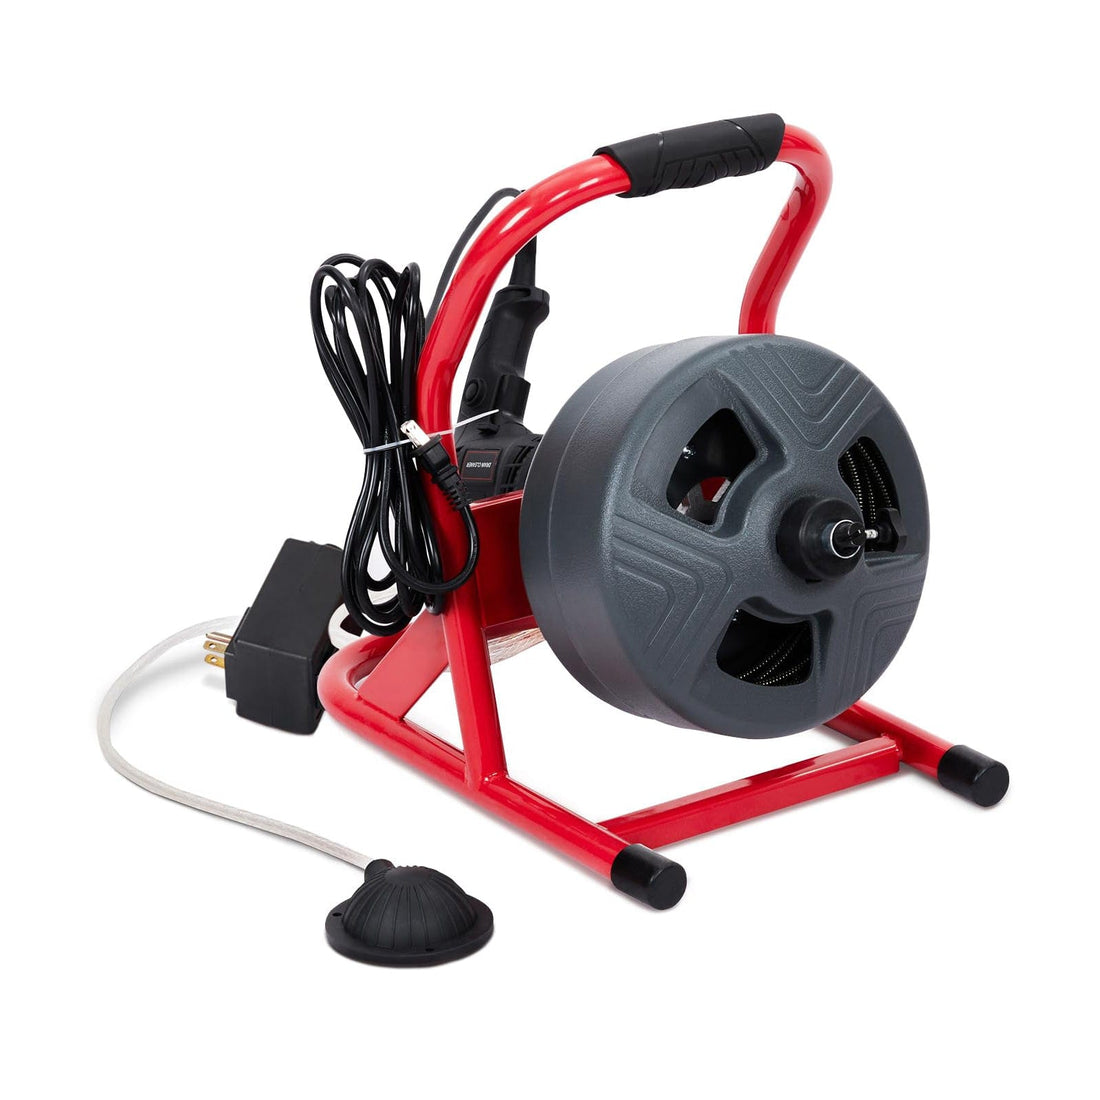 50Ft x 5/16 Inch Drain Cleaner Machine, Electric Drain Auger Professional for 3/4 to 3 Inch Pipes